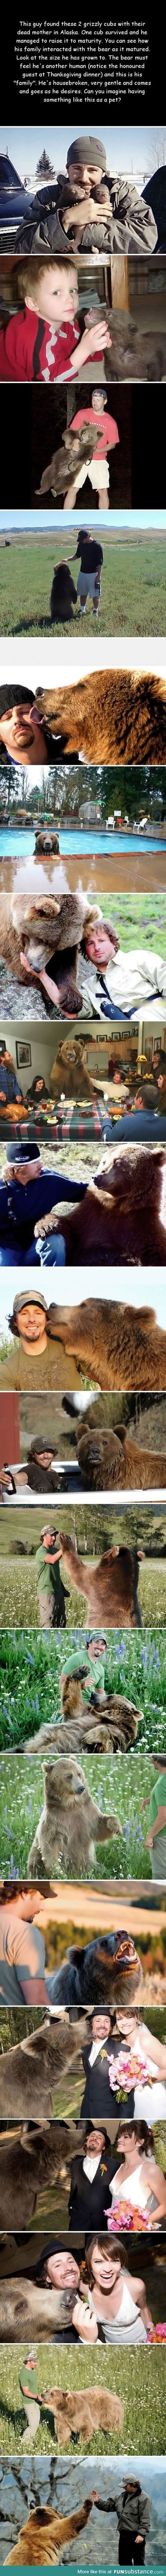 A Story of a man and his bears